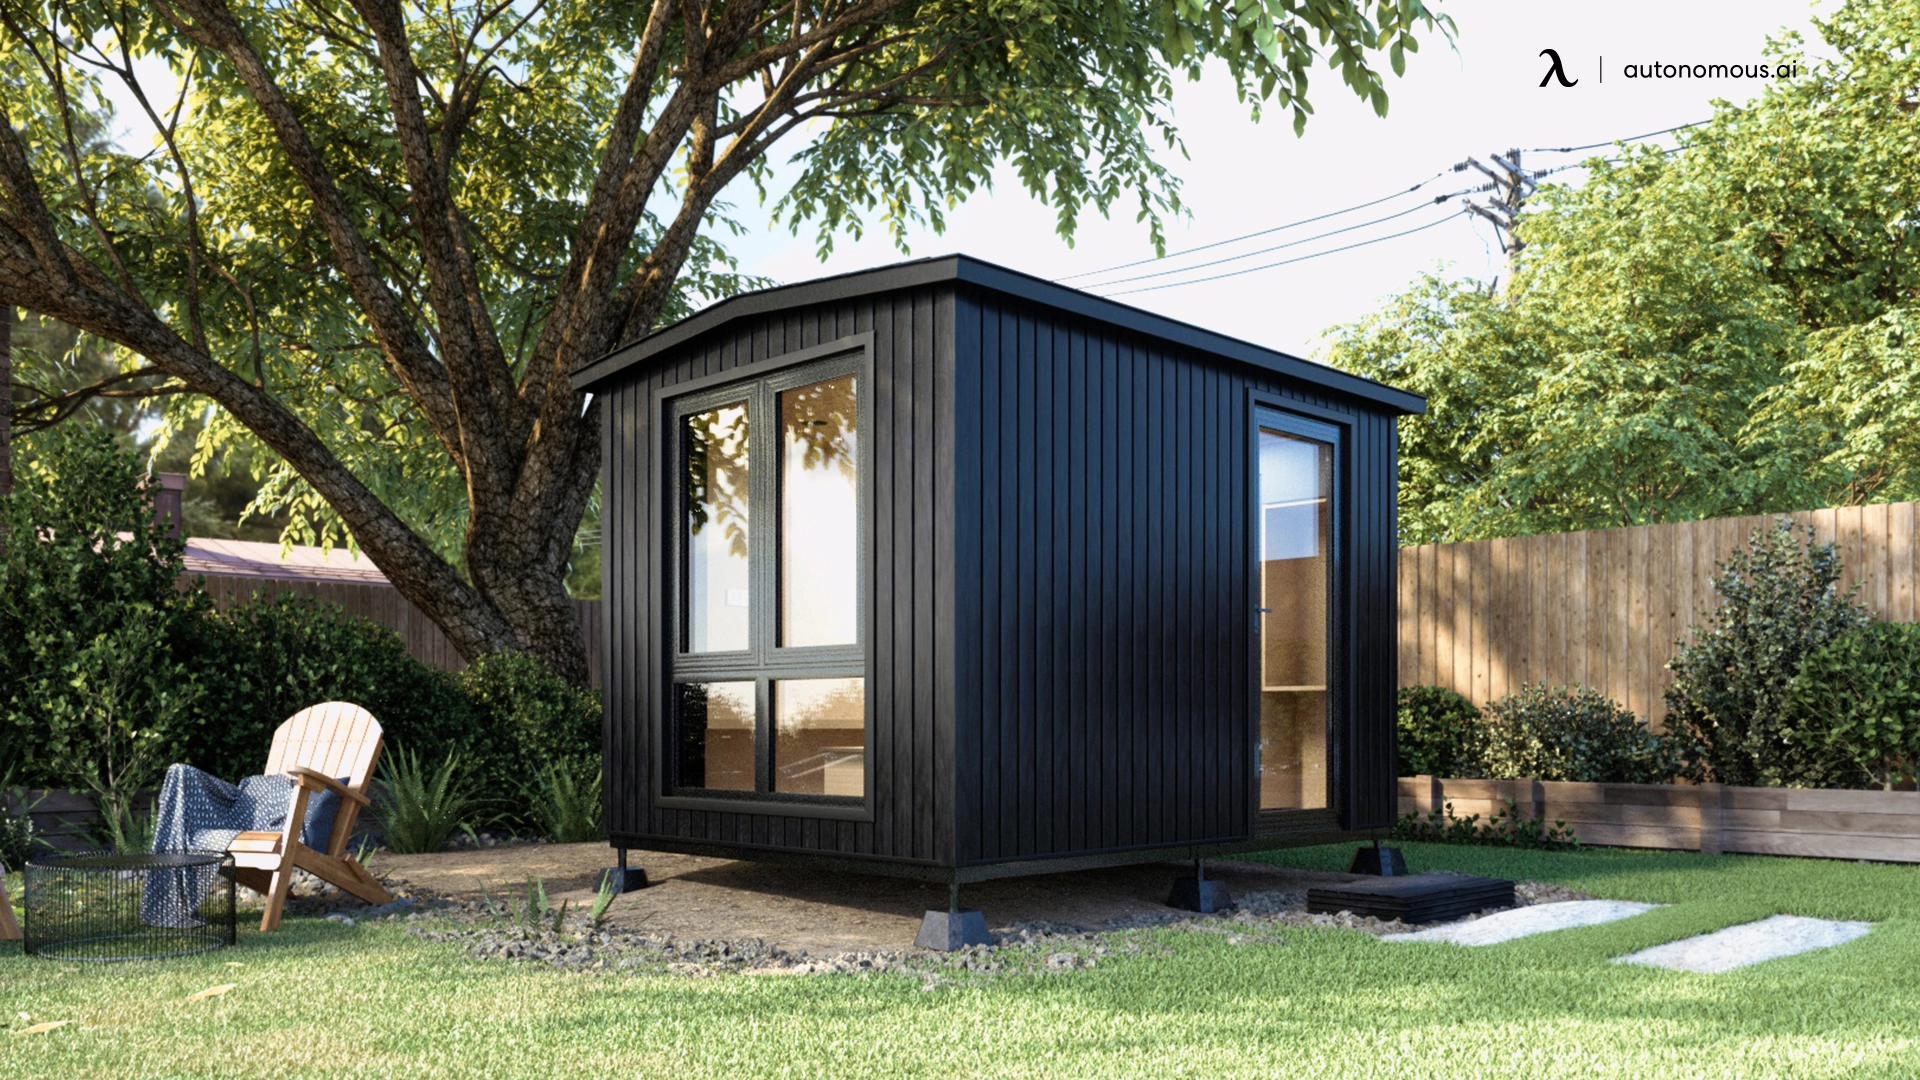 Can a Prefab Cottage Be Customized to Your Needs and Preferences?